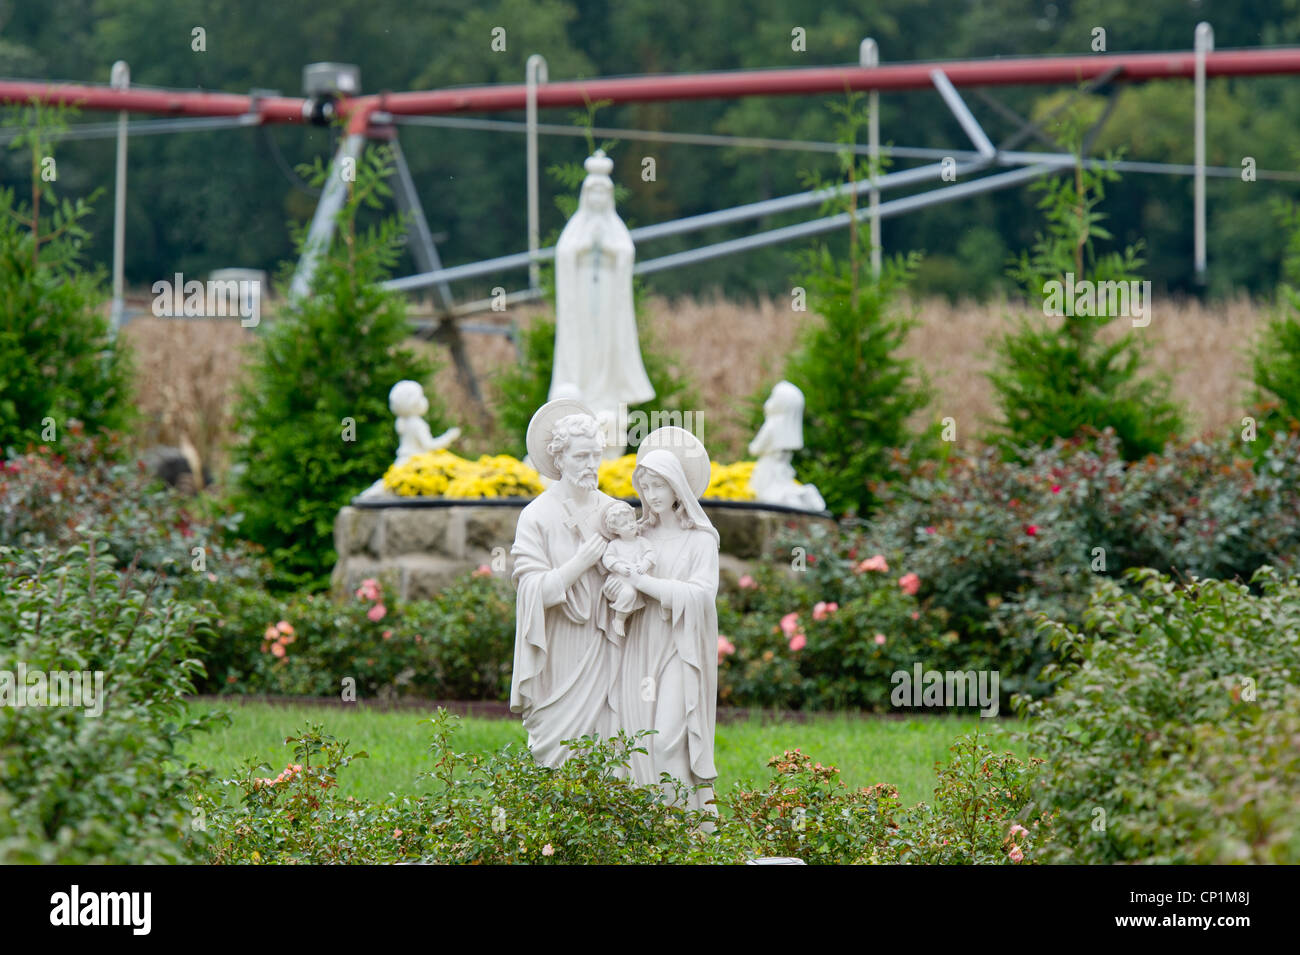 Irrigation system over corn crop behind Christian lawn ornaments on farm Stock Photo